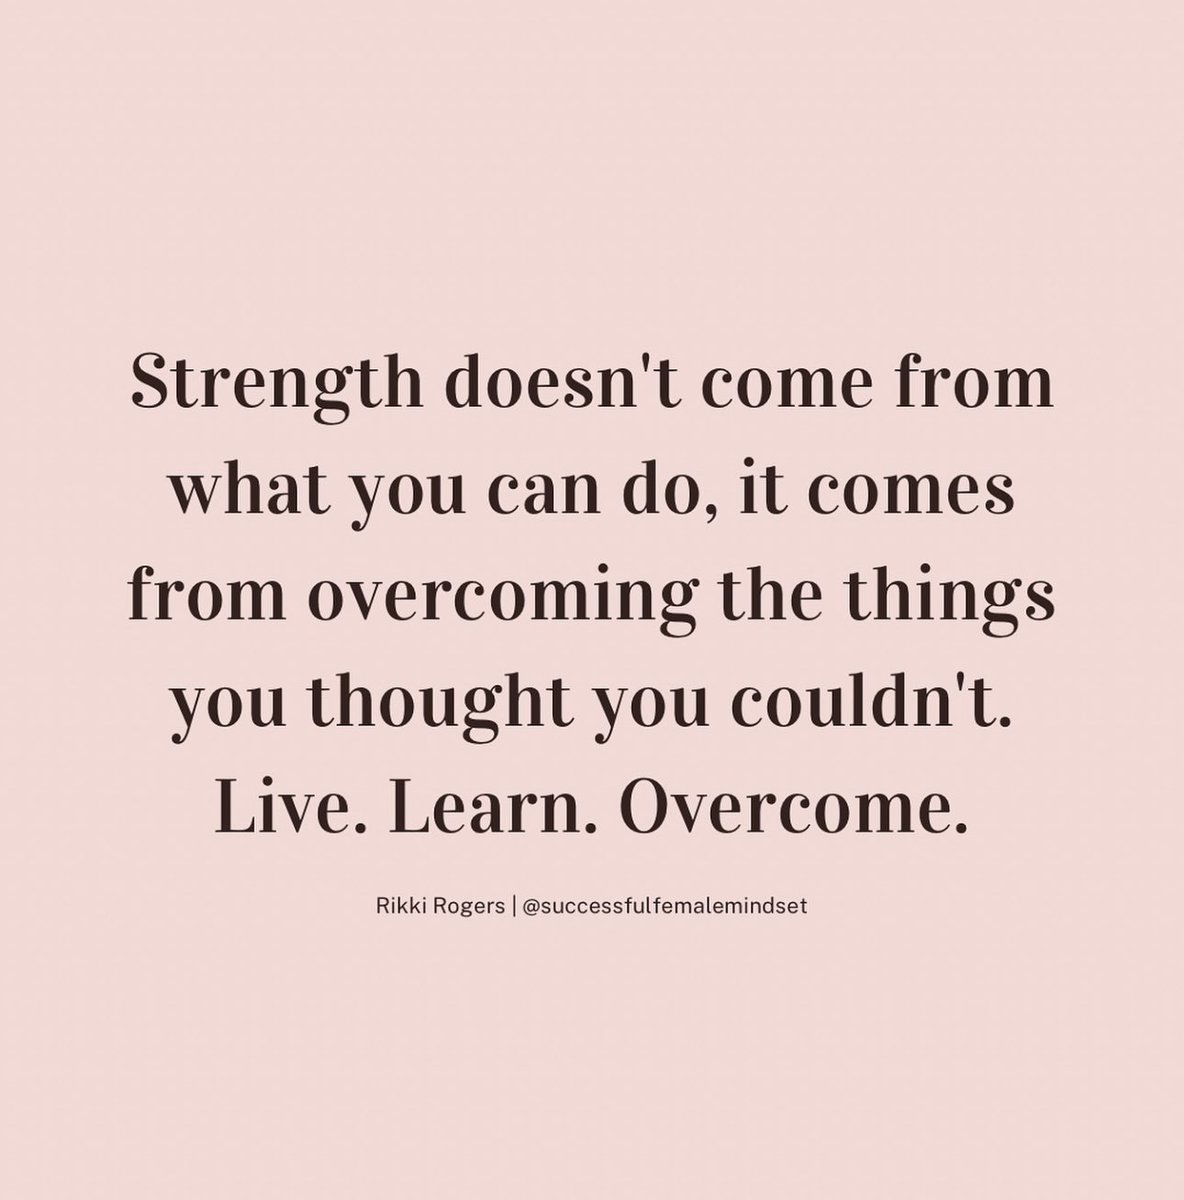 Happy Friday and your daily dose of inspiration!💕

Live!
Learn!
Overcome!💕

Grateful for the opportunity to live, love, and lead.💕

#ALLmeansALL #GreenfieldGuarantee #ProudtobeGUSD
#CultivateCuriosity
#TrustAndInspire
#TrustAndGrow #GUSDReadersShine 
#GUSDProud